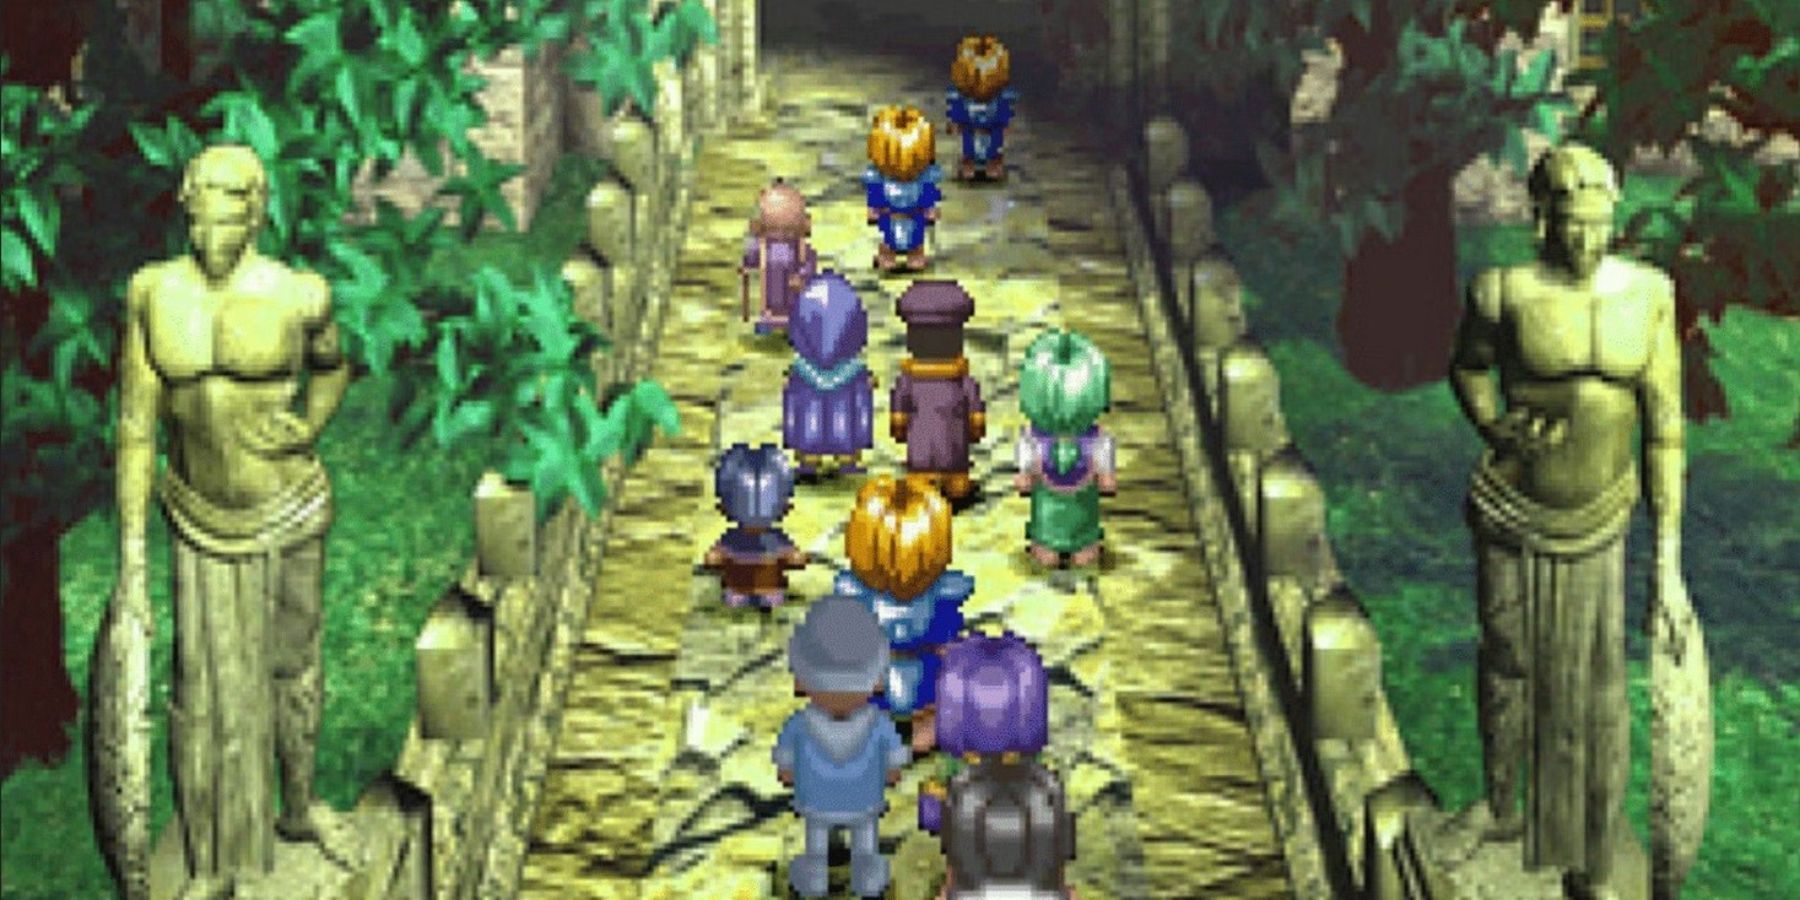 Claude and the assembled group walking on a path